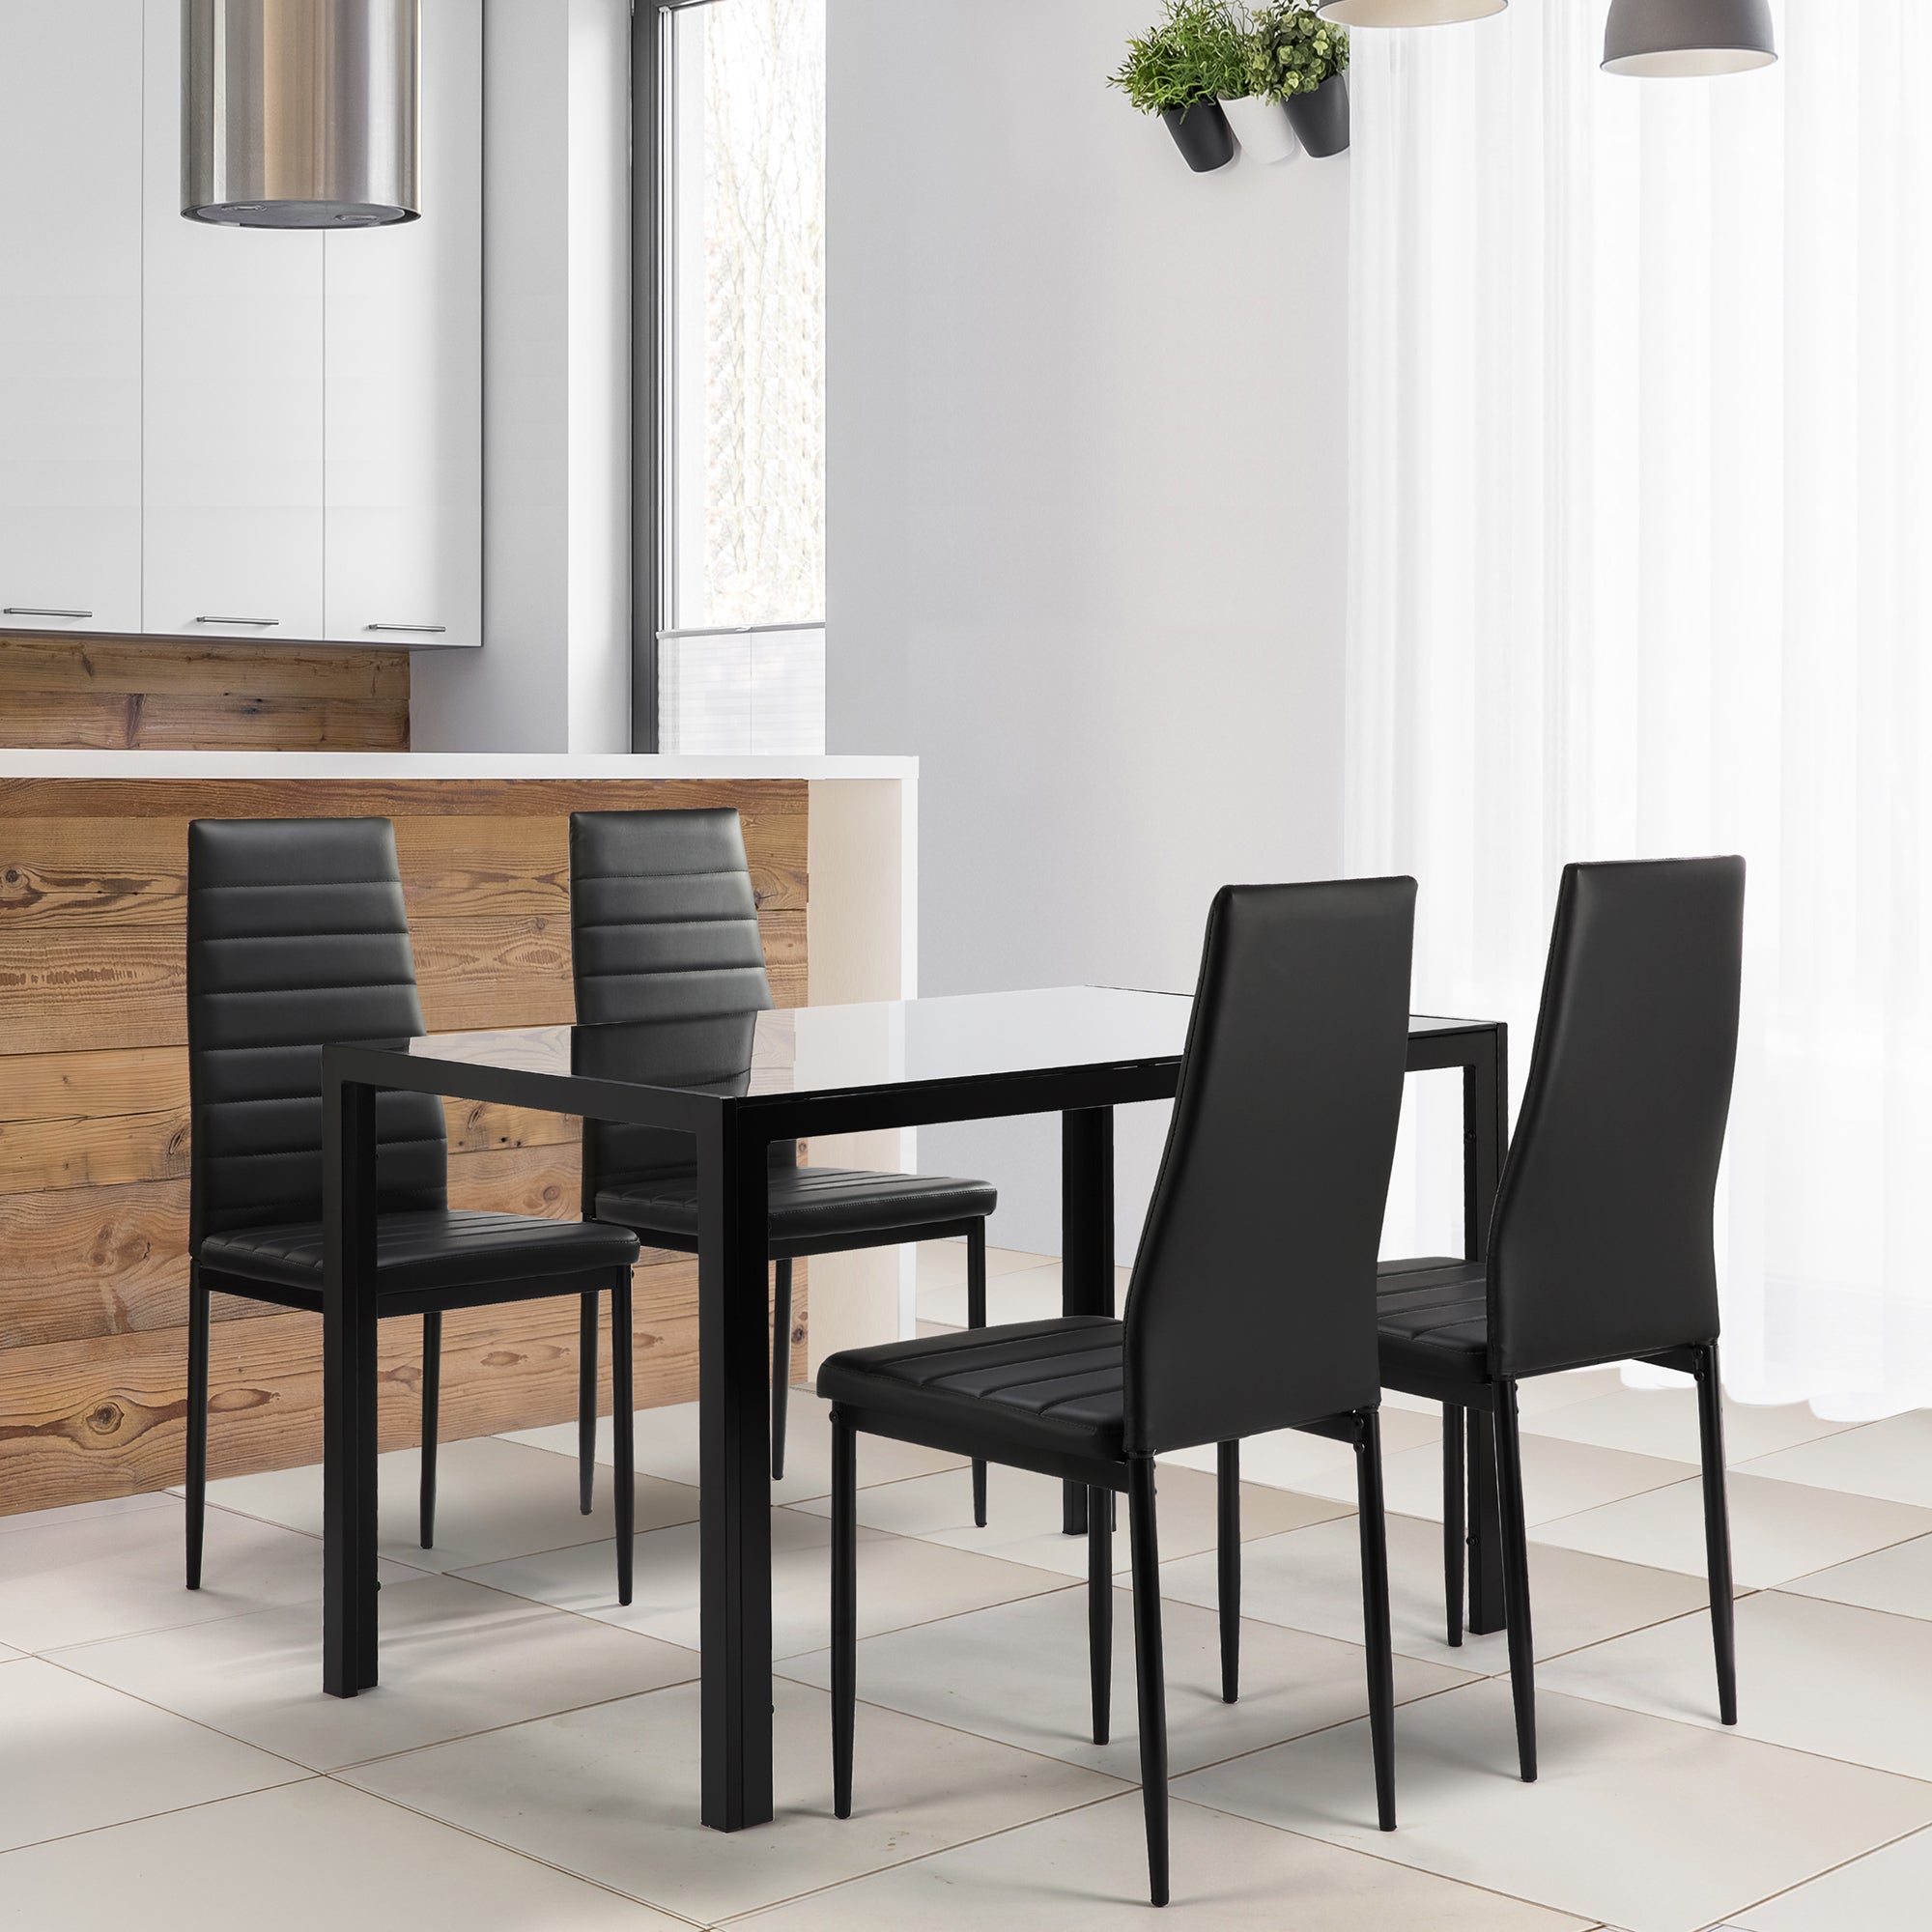 Capri 5 Piece Dining Set, Black Tempered Glass Table and 4 Black upholstered Chairs